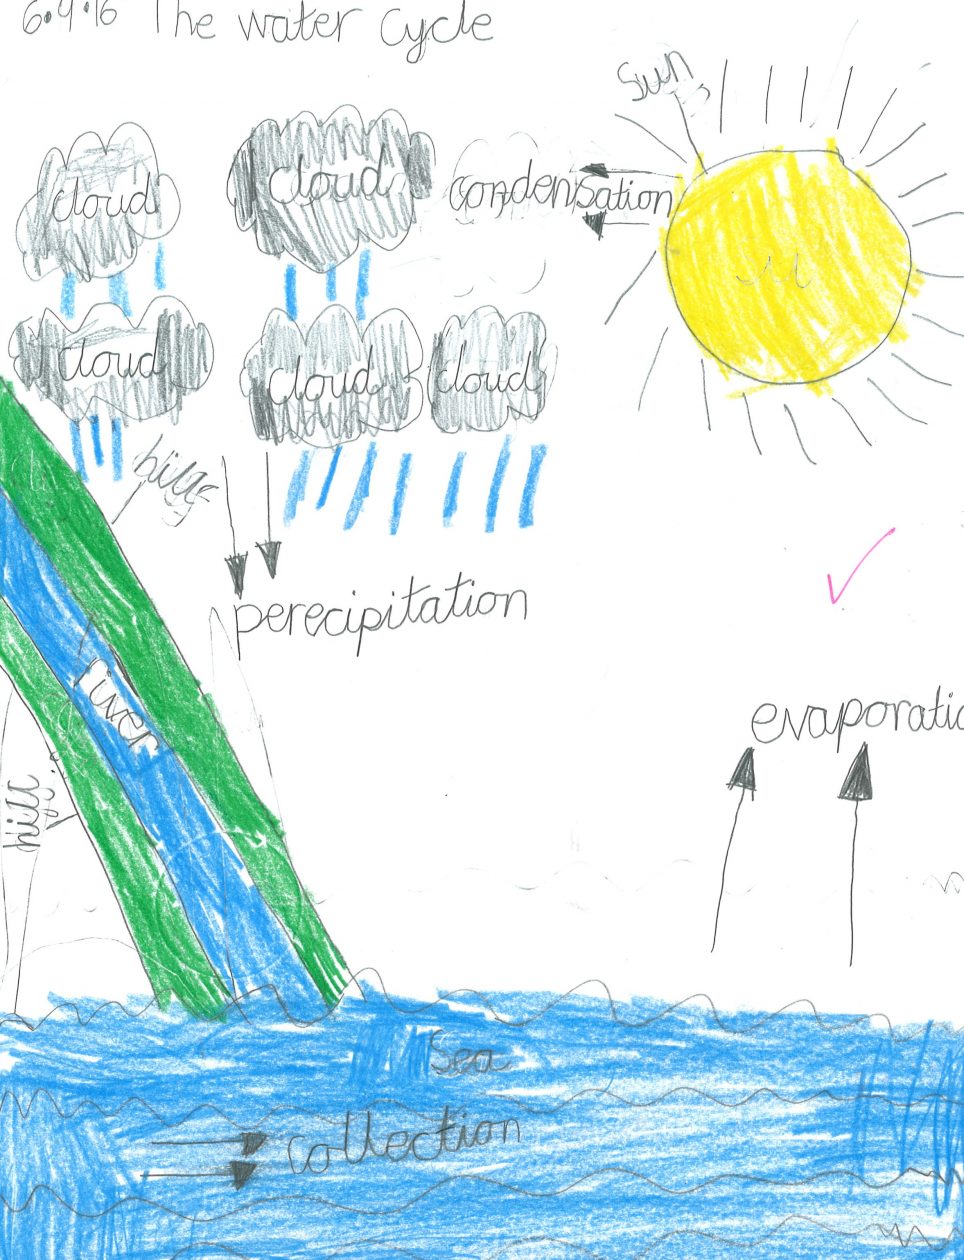 How to draw and color the water cycle